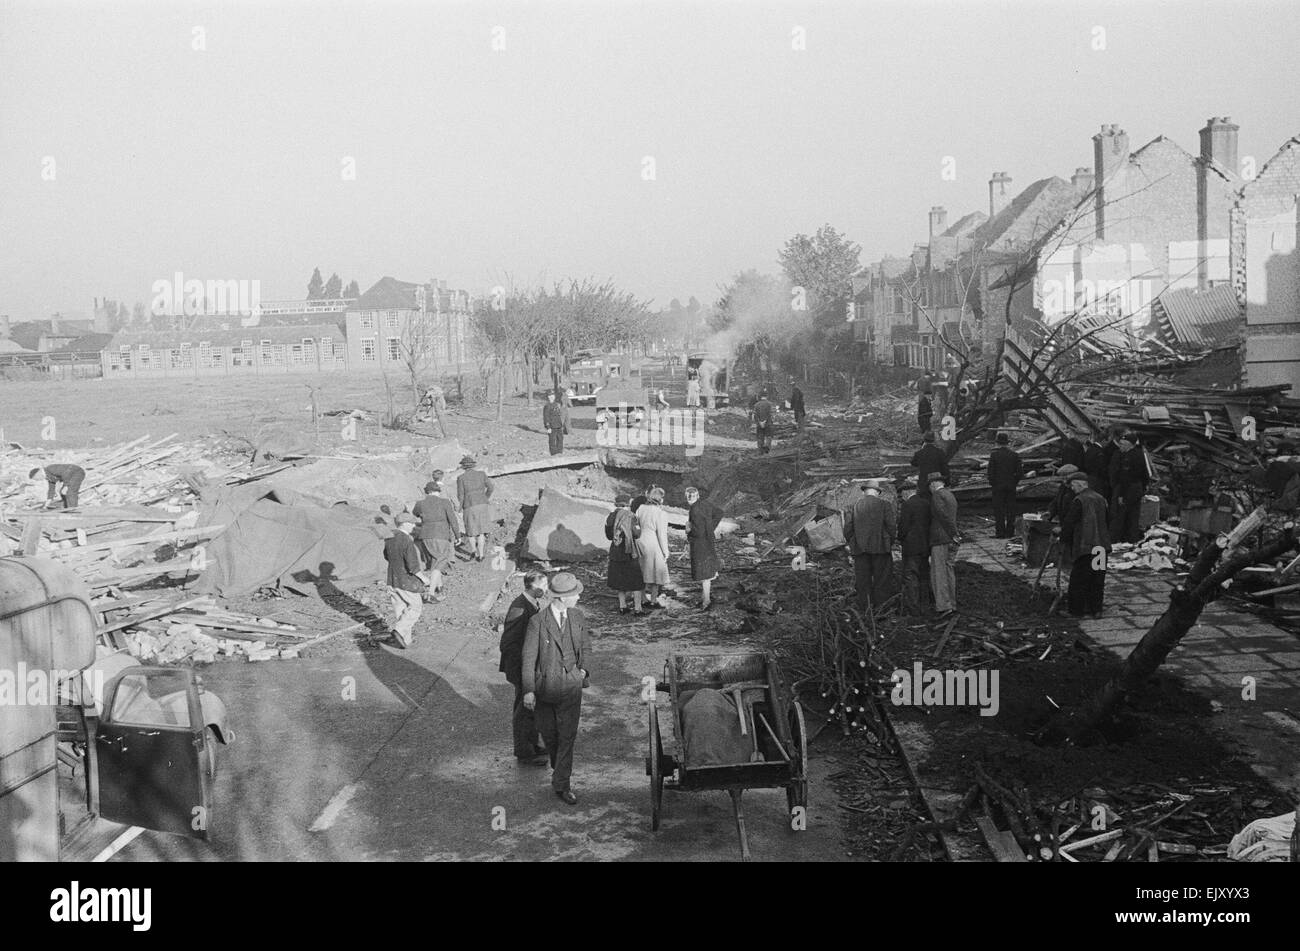 The aftermath of  V2 explosion. On the 8th September 1944 a huge explosion occured in Staveley Road, Chiswick, West London. There had been no siren, no warning and no V1 flying bombs had been sighted.  The explosion was caused by the first V2 ballistic missile fired in anger. Hitler's much vaunted A4 Rocket more commonly known as the V2 weighed 13 tons and had arrived via the stratosphere at 3,000 miles an hour faster than the speed of sound. This meant that the first anybody knew about the attack was the explosion followed by the roar of the rocket motors catching up Stock Photo